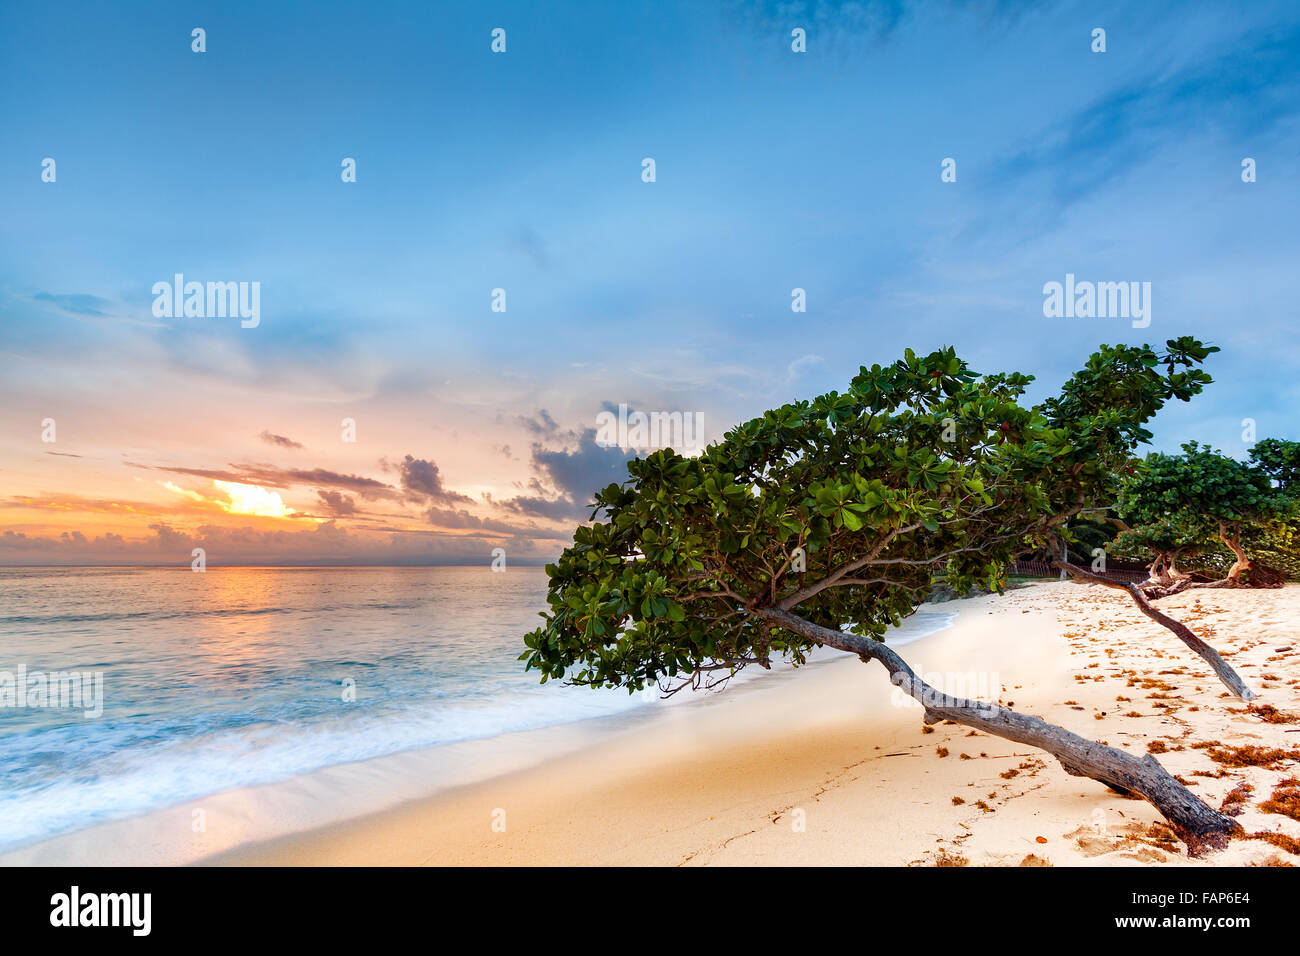 Exotic seascape with sea grape trees leaning above a sandy Caribbean beach at sunset, in Cayo Levantado, Dominican Republic Stock Photo